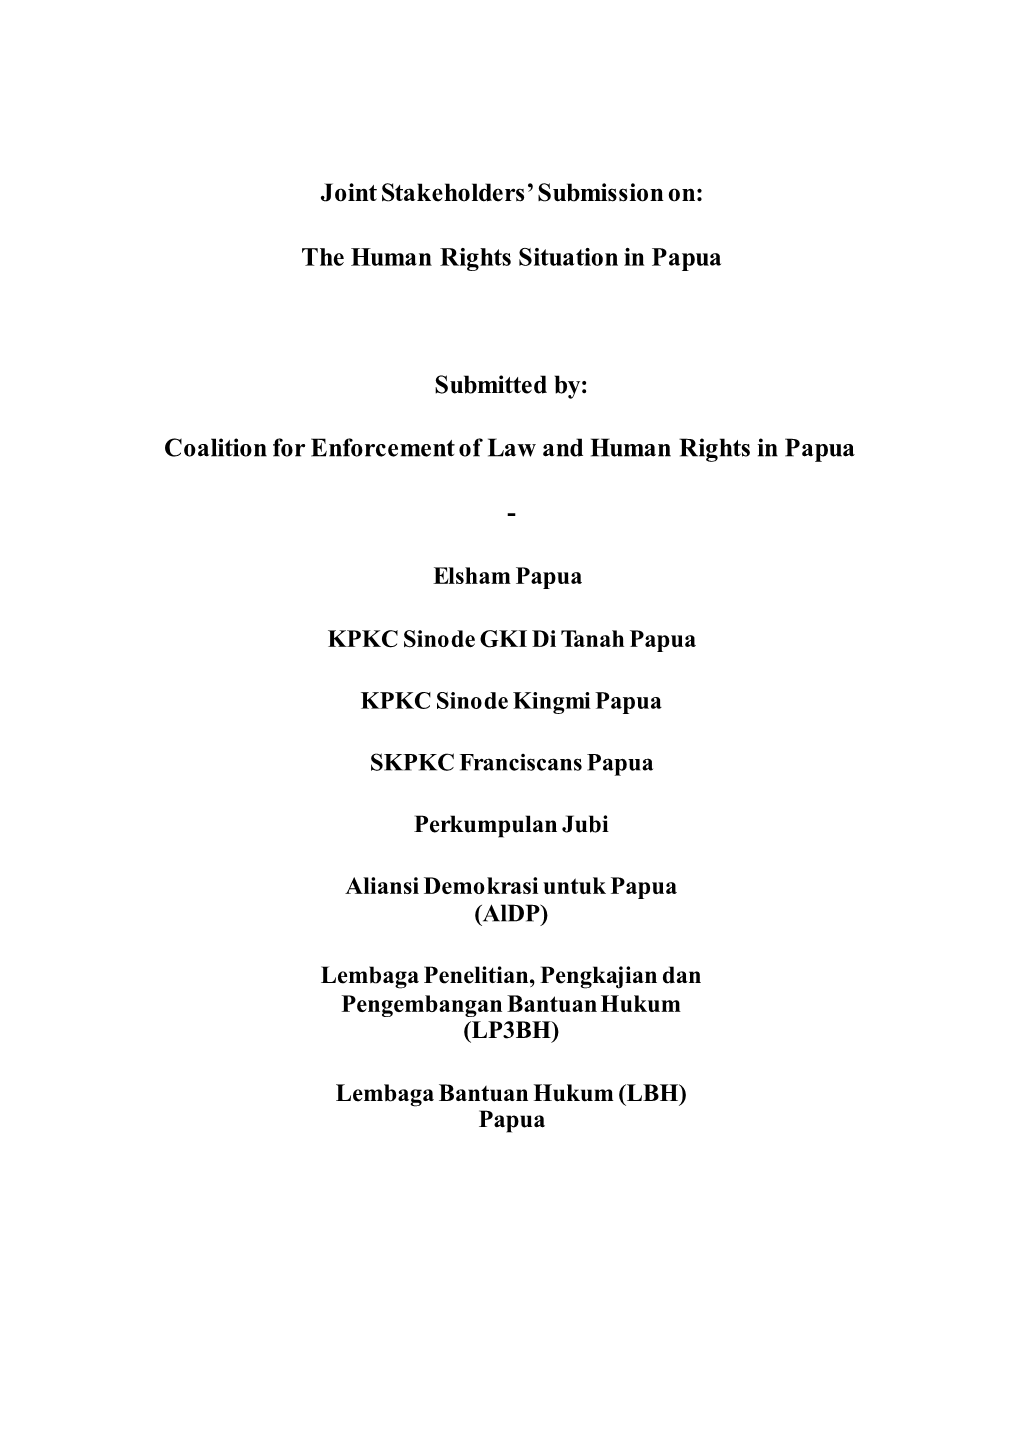 Coalition for Enforcement of Law and Human Rights in Papua